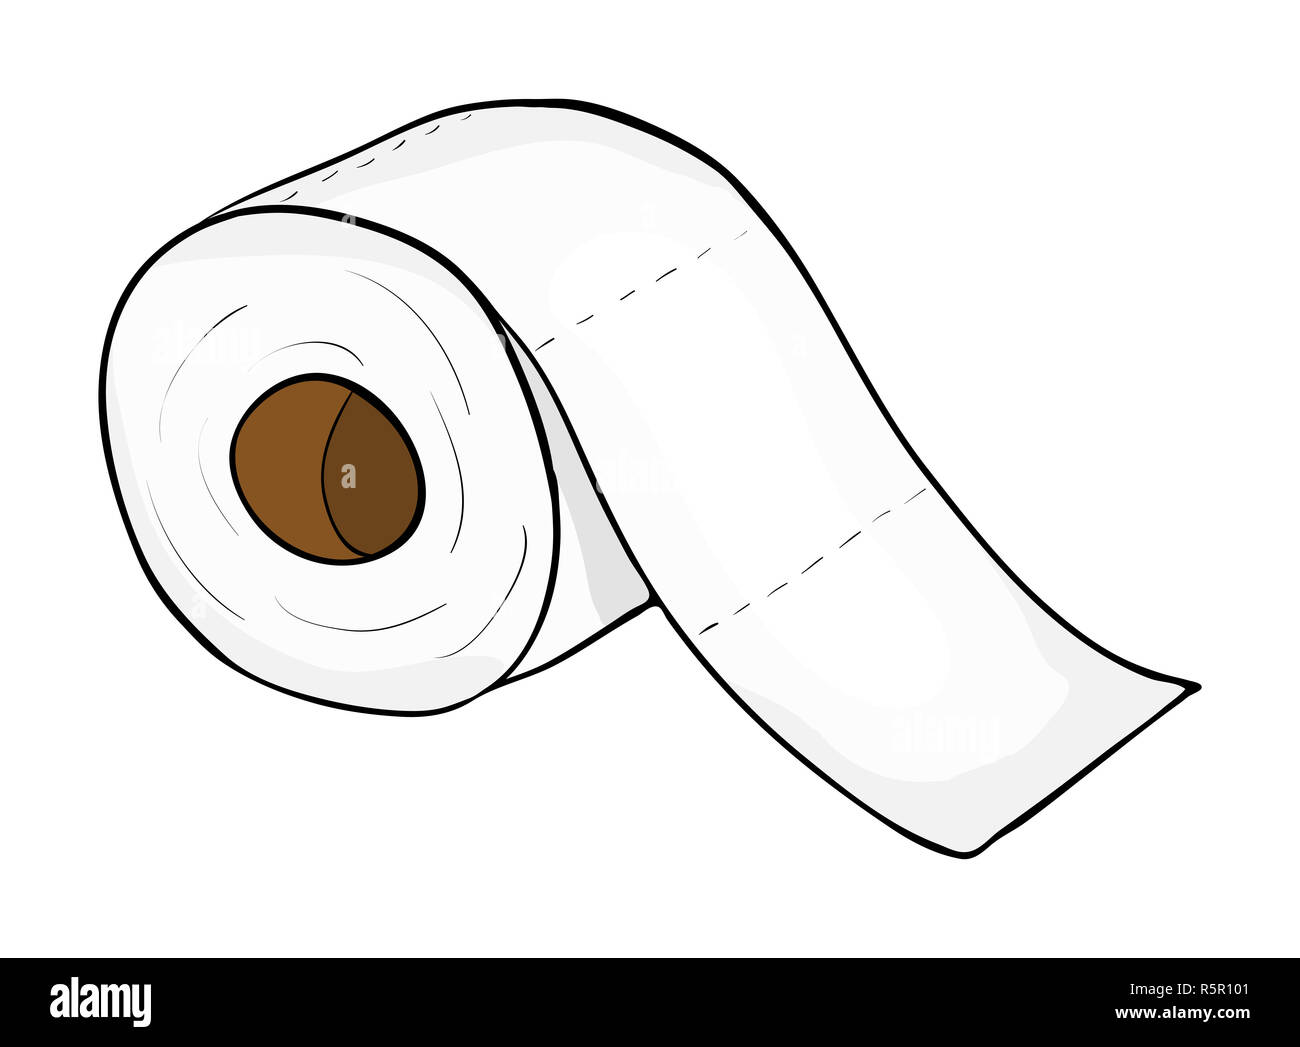 toilet paper roll vector symbol icon design. Beautiful illustration  isolated on white background Stock Photo - Alamy